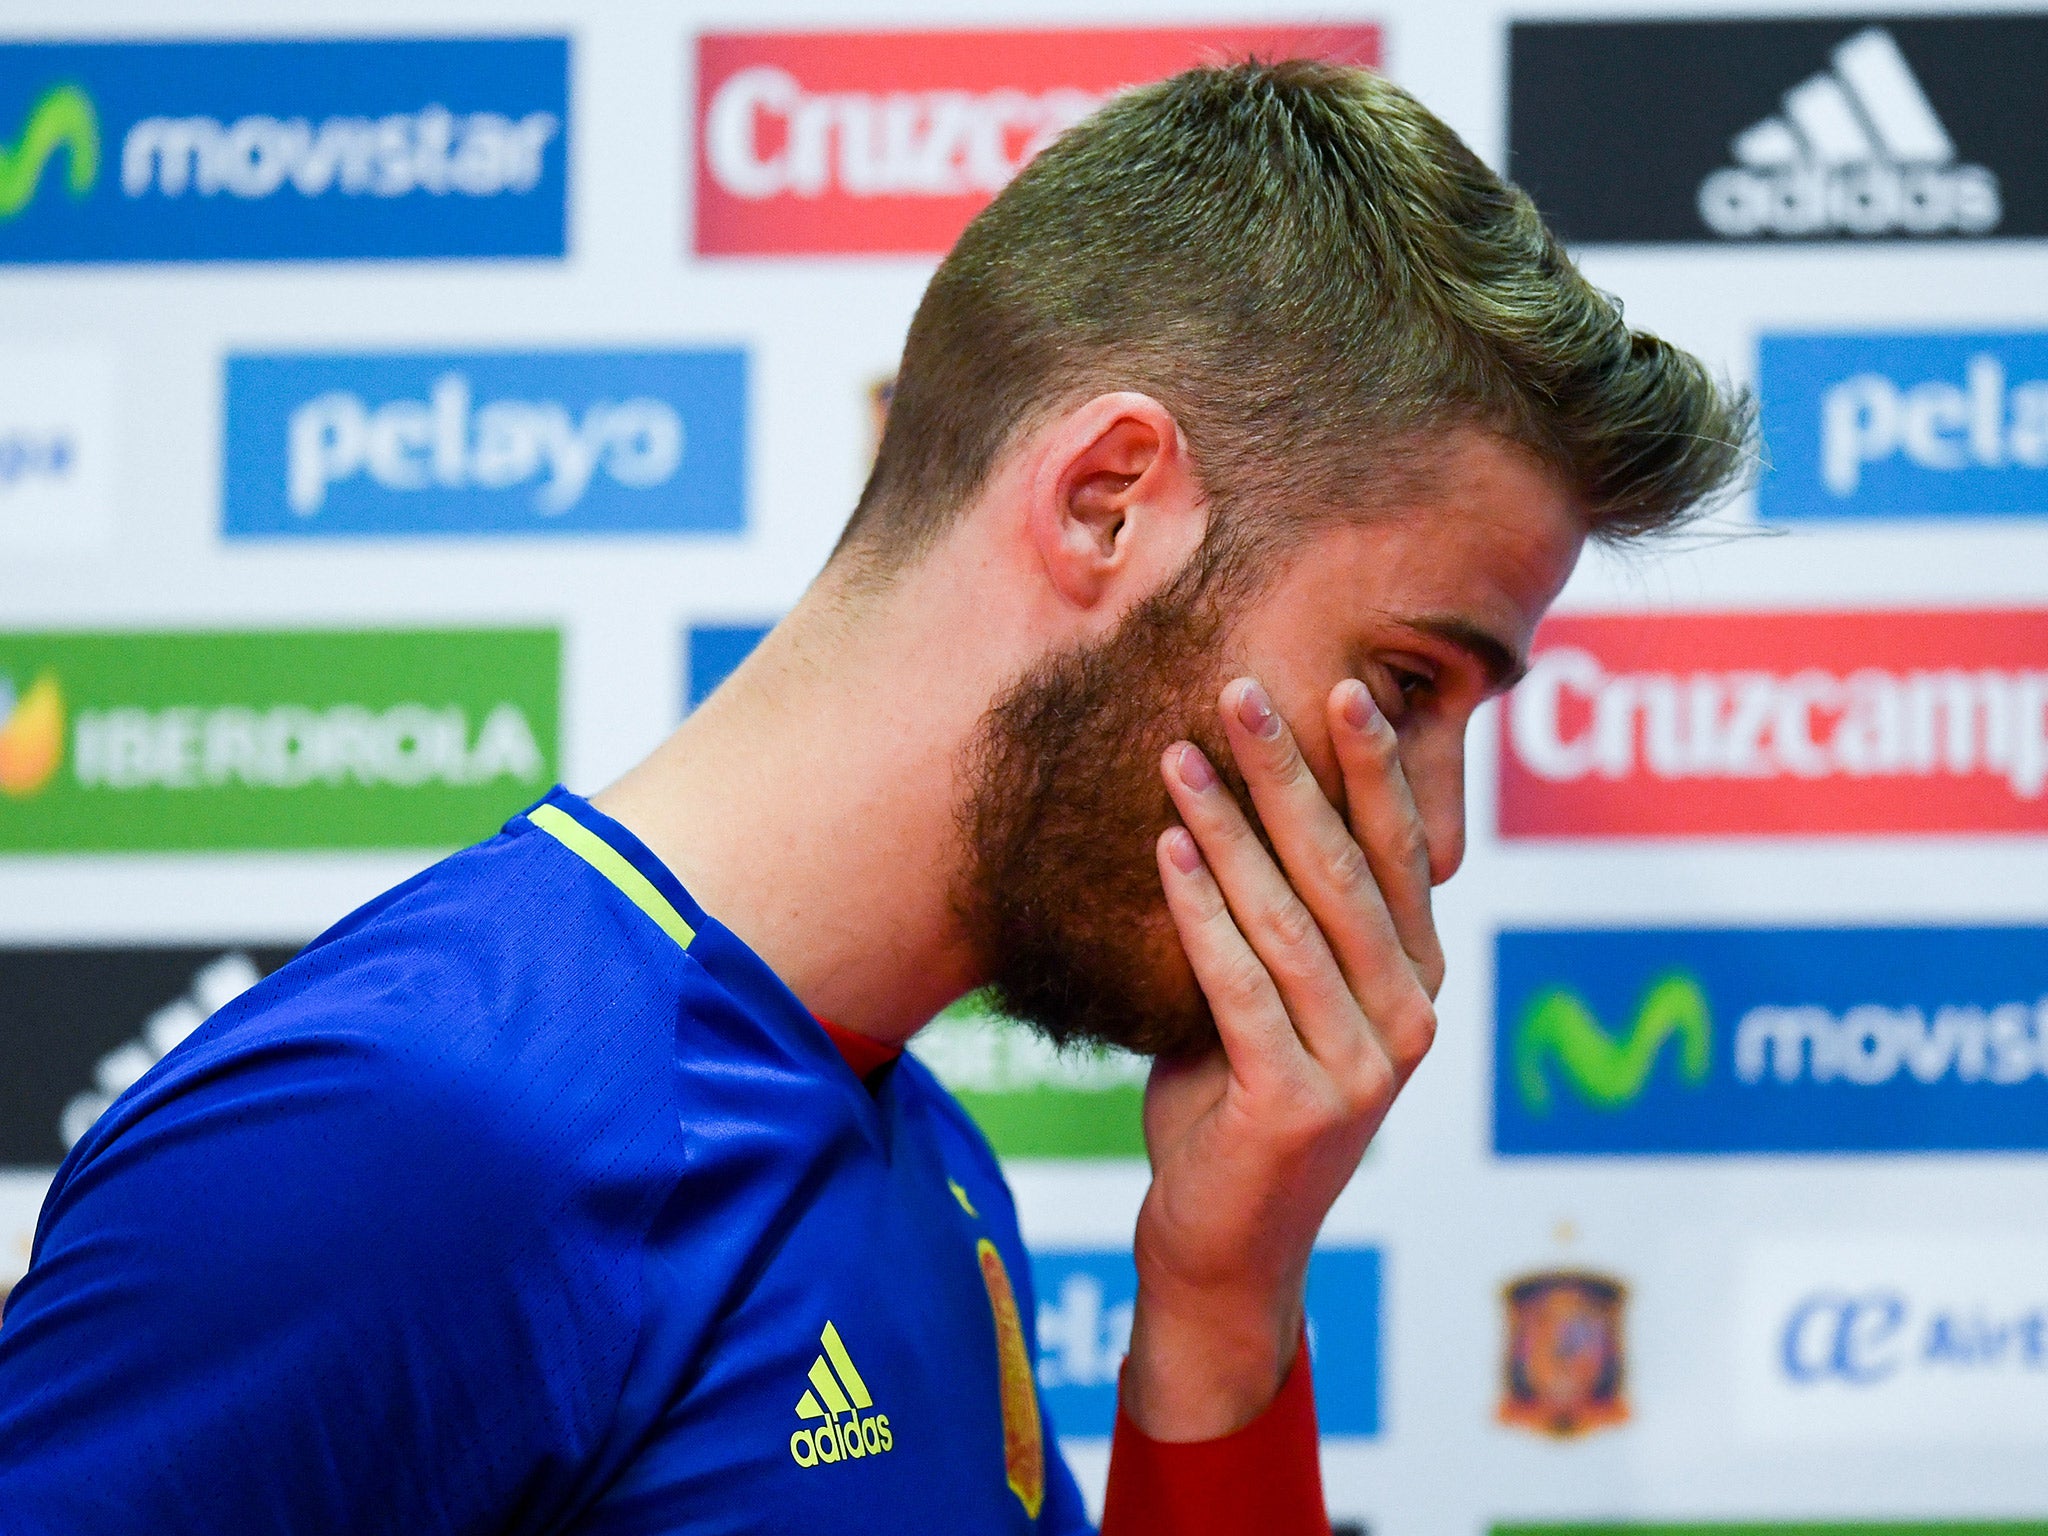 David De Gea spoke at a press conference to deny all allegations made against him